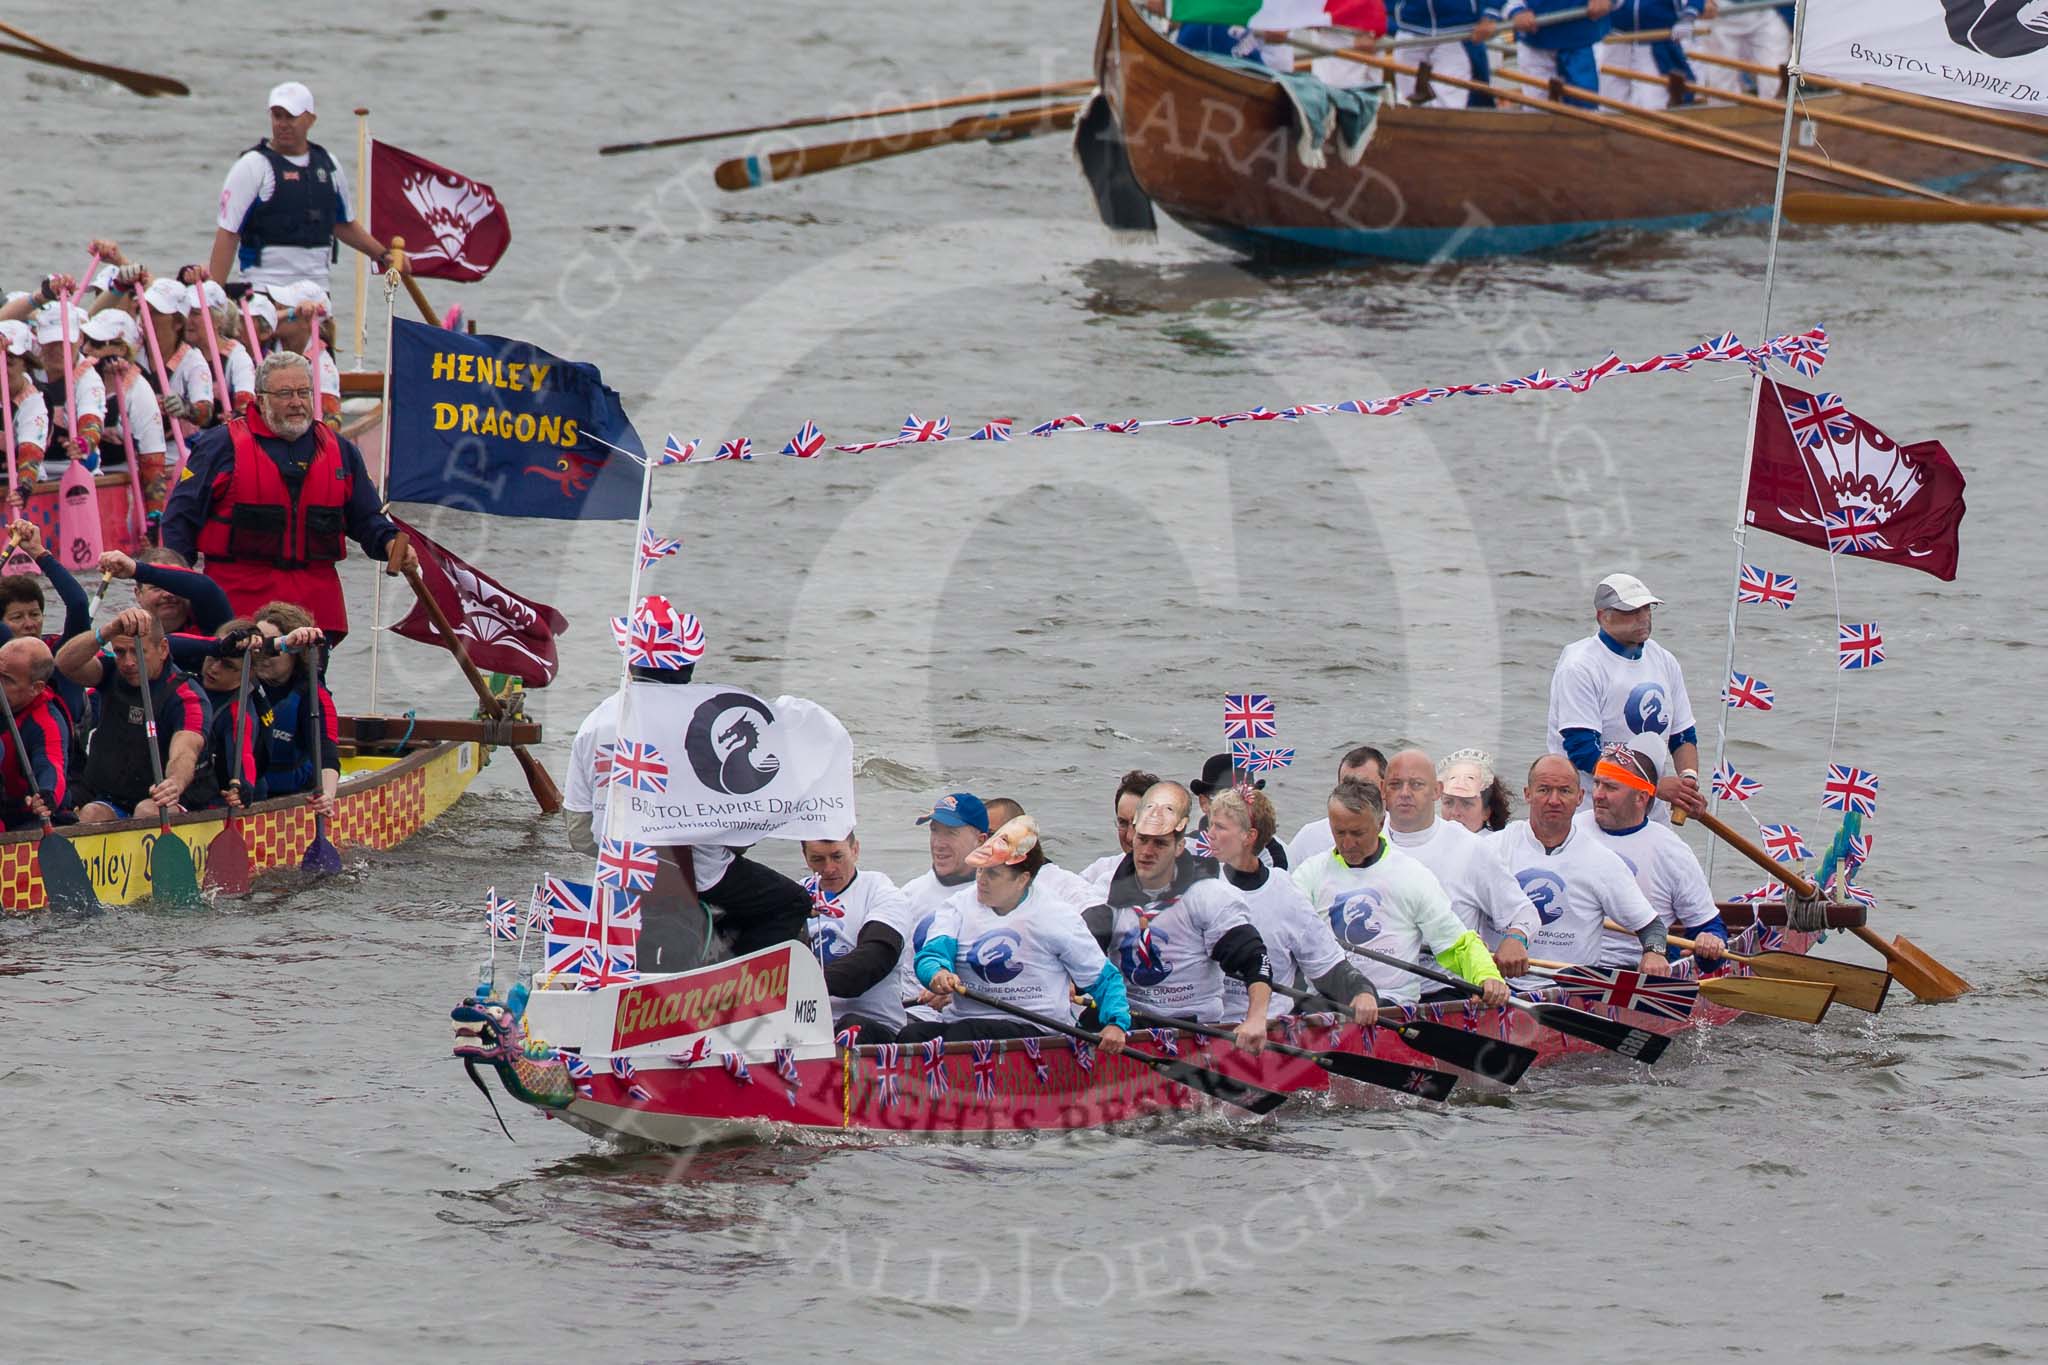 Thames Diamond Jubilee Pageant: DRAGON BOATS-Guangzhou (M185)..
River Thames seen from Battersea Bridge,
London,

United Kingdom,
on 03 June 2012 at 14:48, image #125